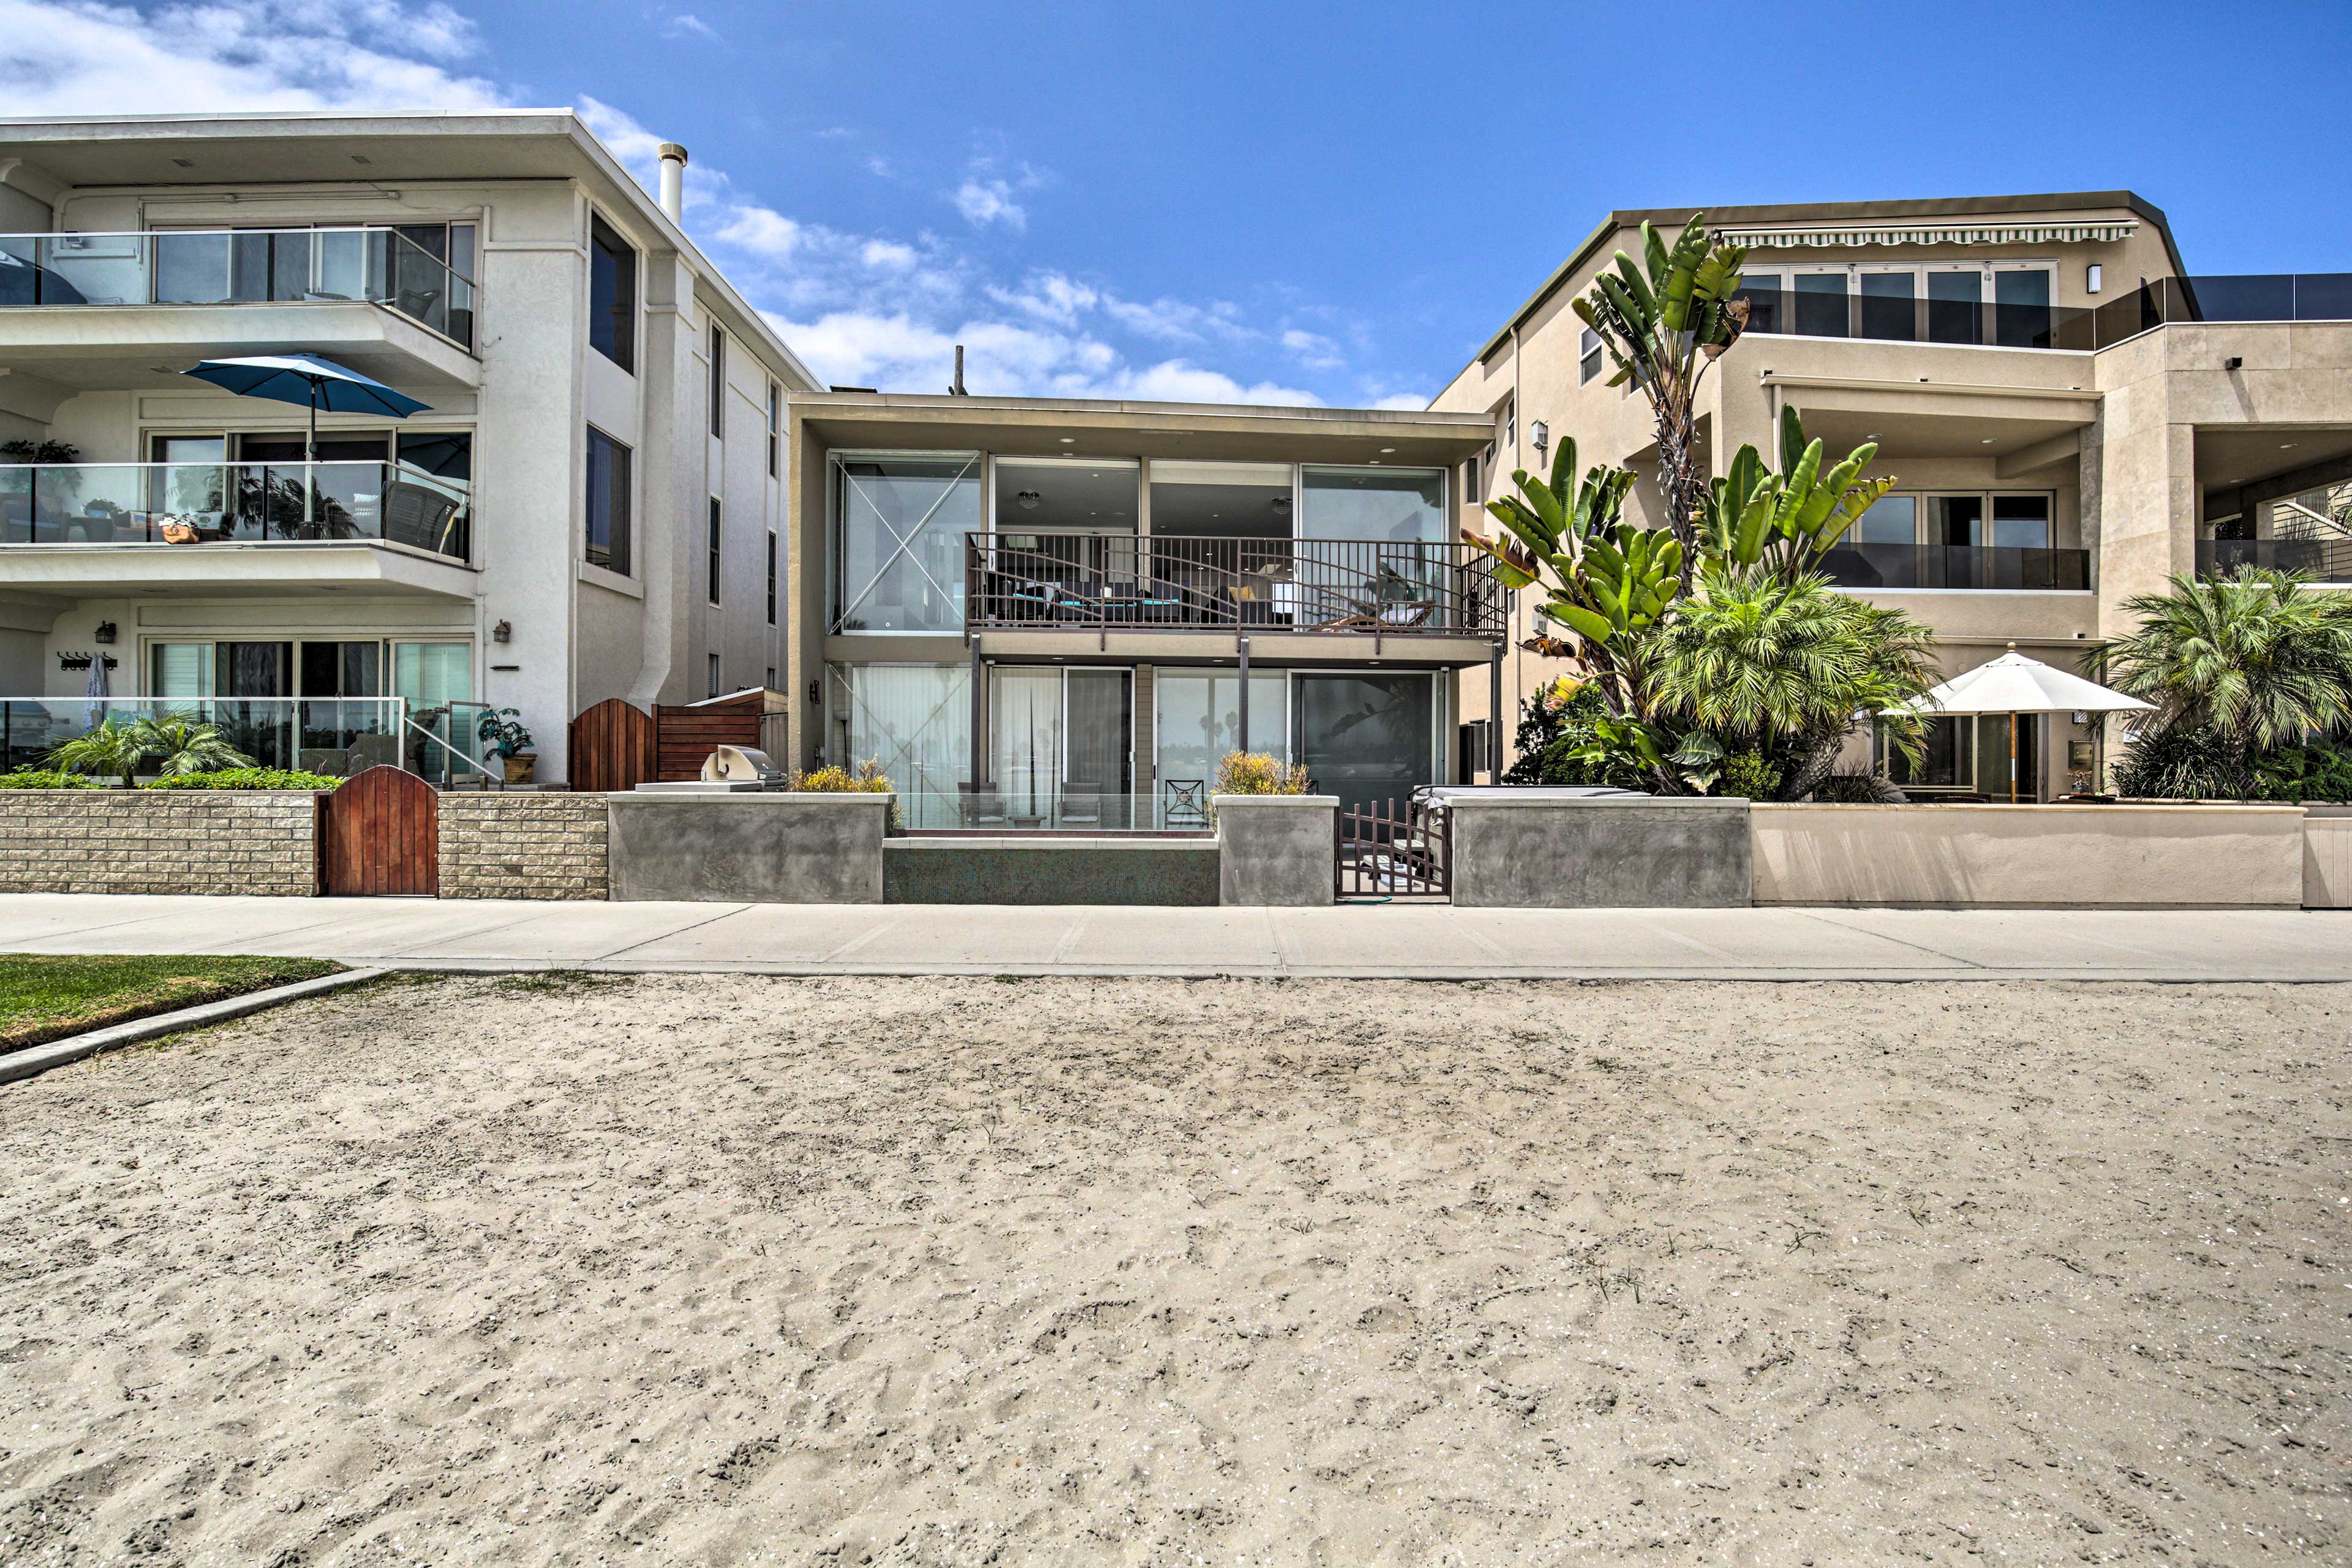 Townhome Exterior | Located Directly on Bayside Boardwalk